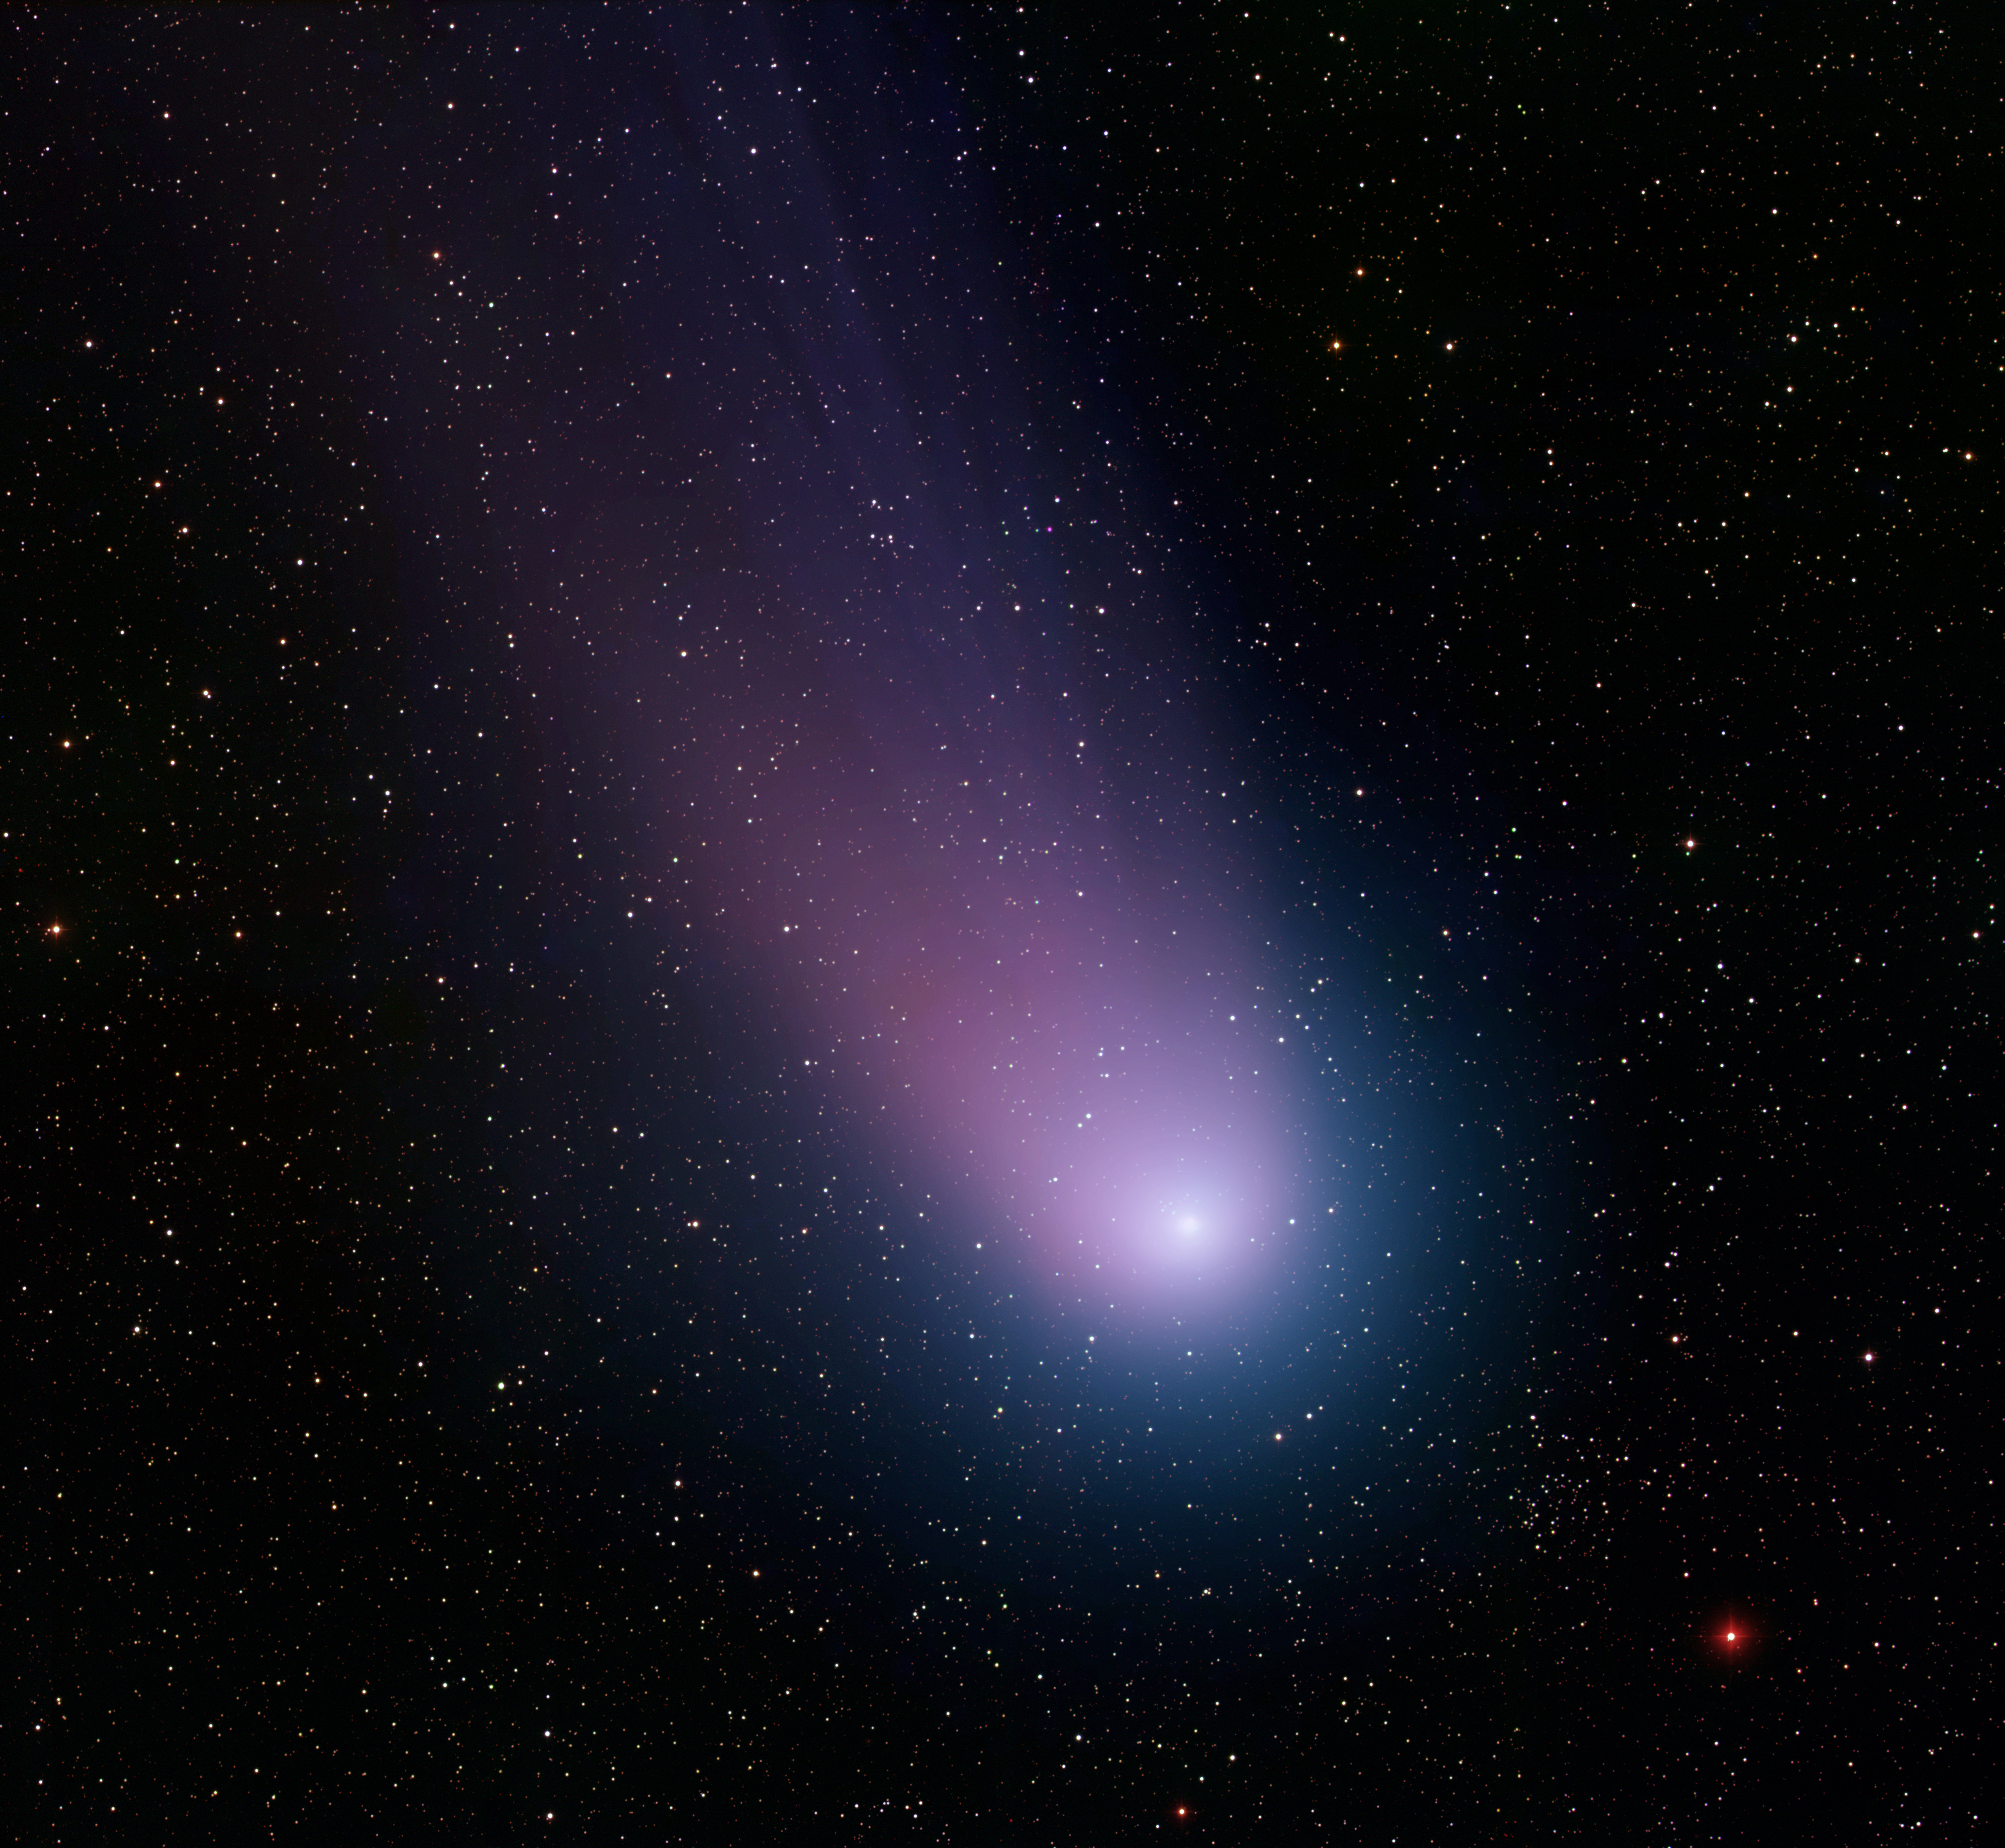 An image of Comet NEAT, captured by Kitt Peak National Observatory